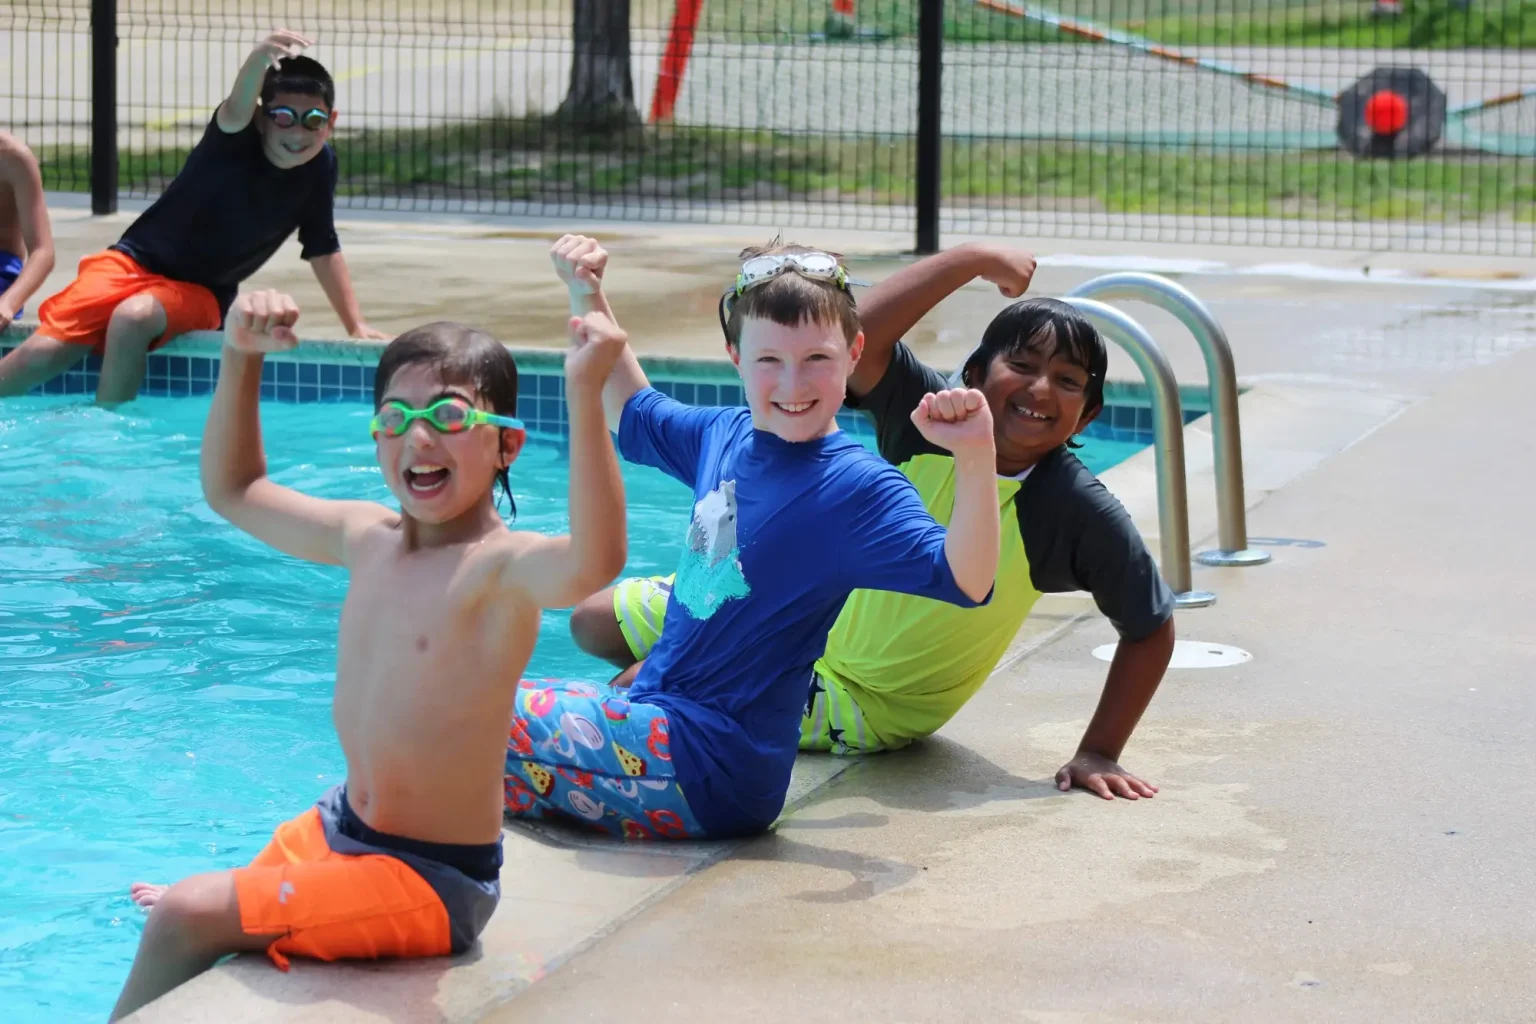 Fessenden Summer Camps kids having fun at the pool